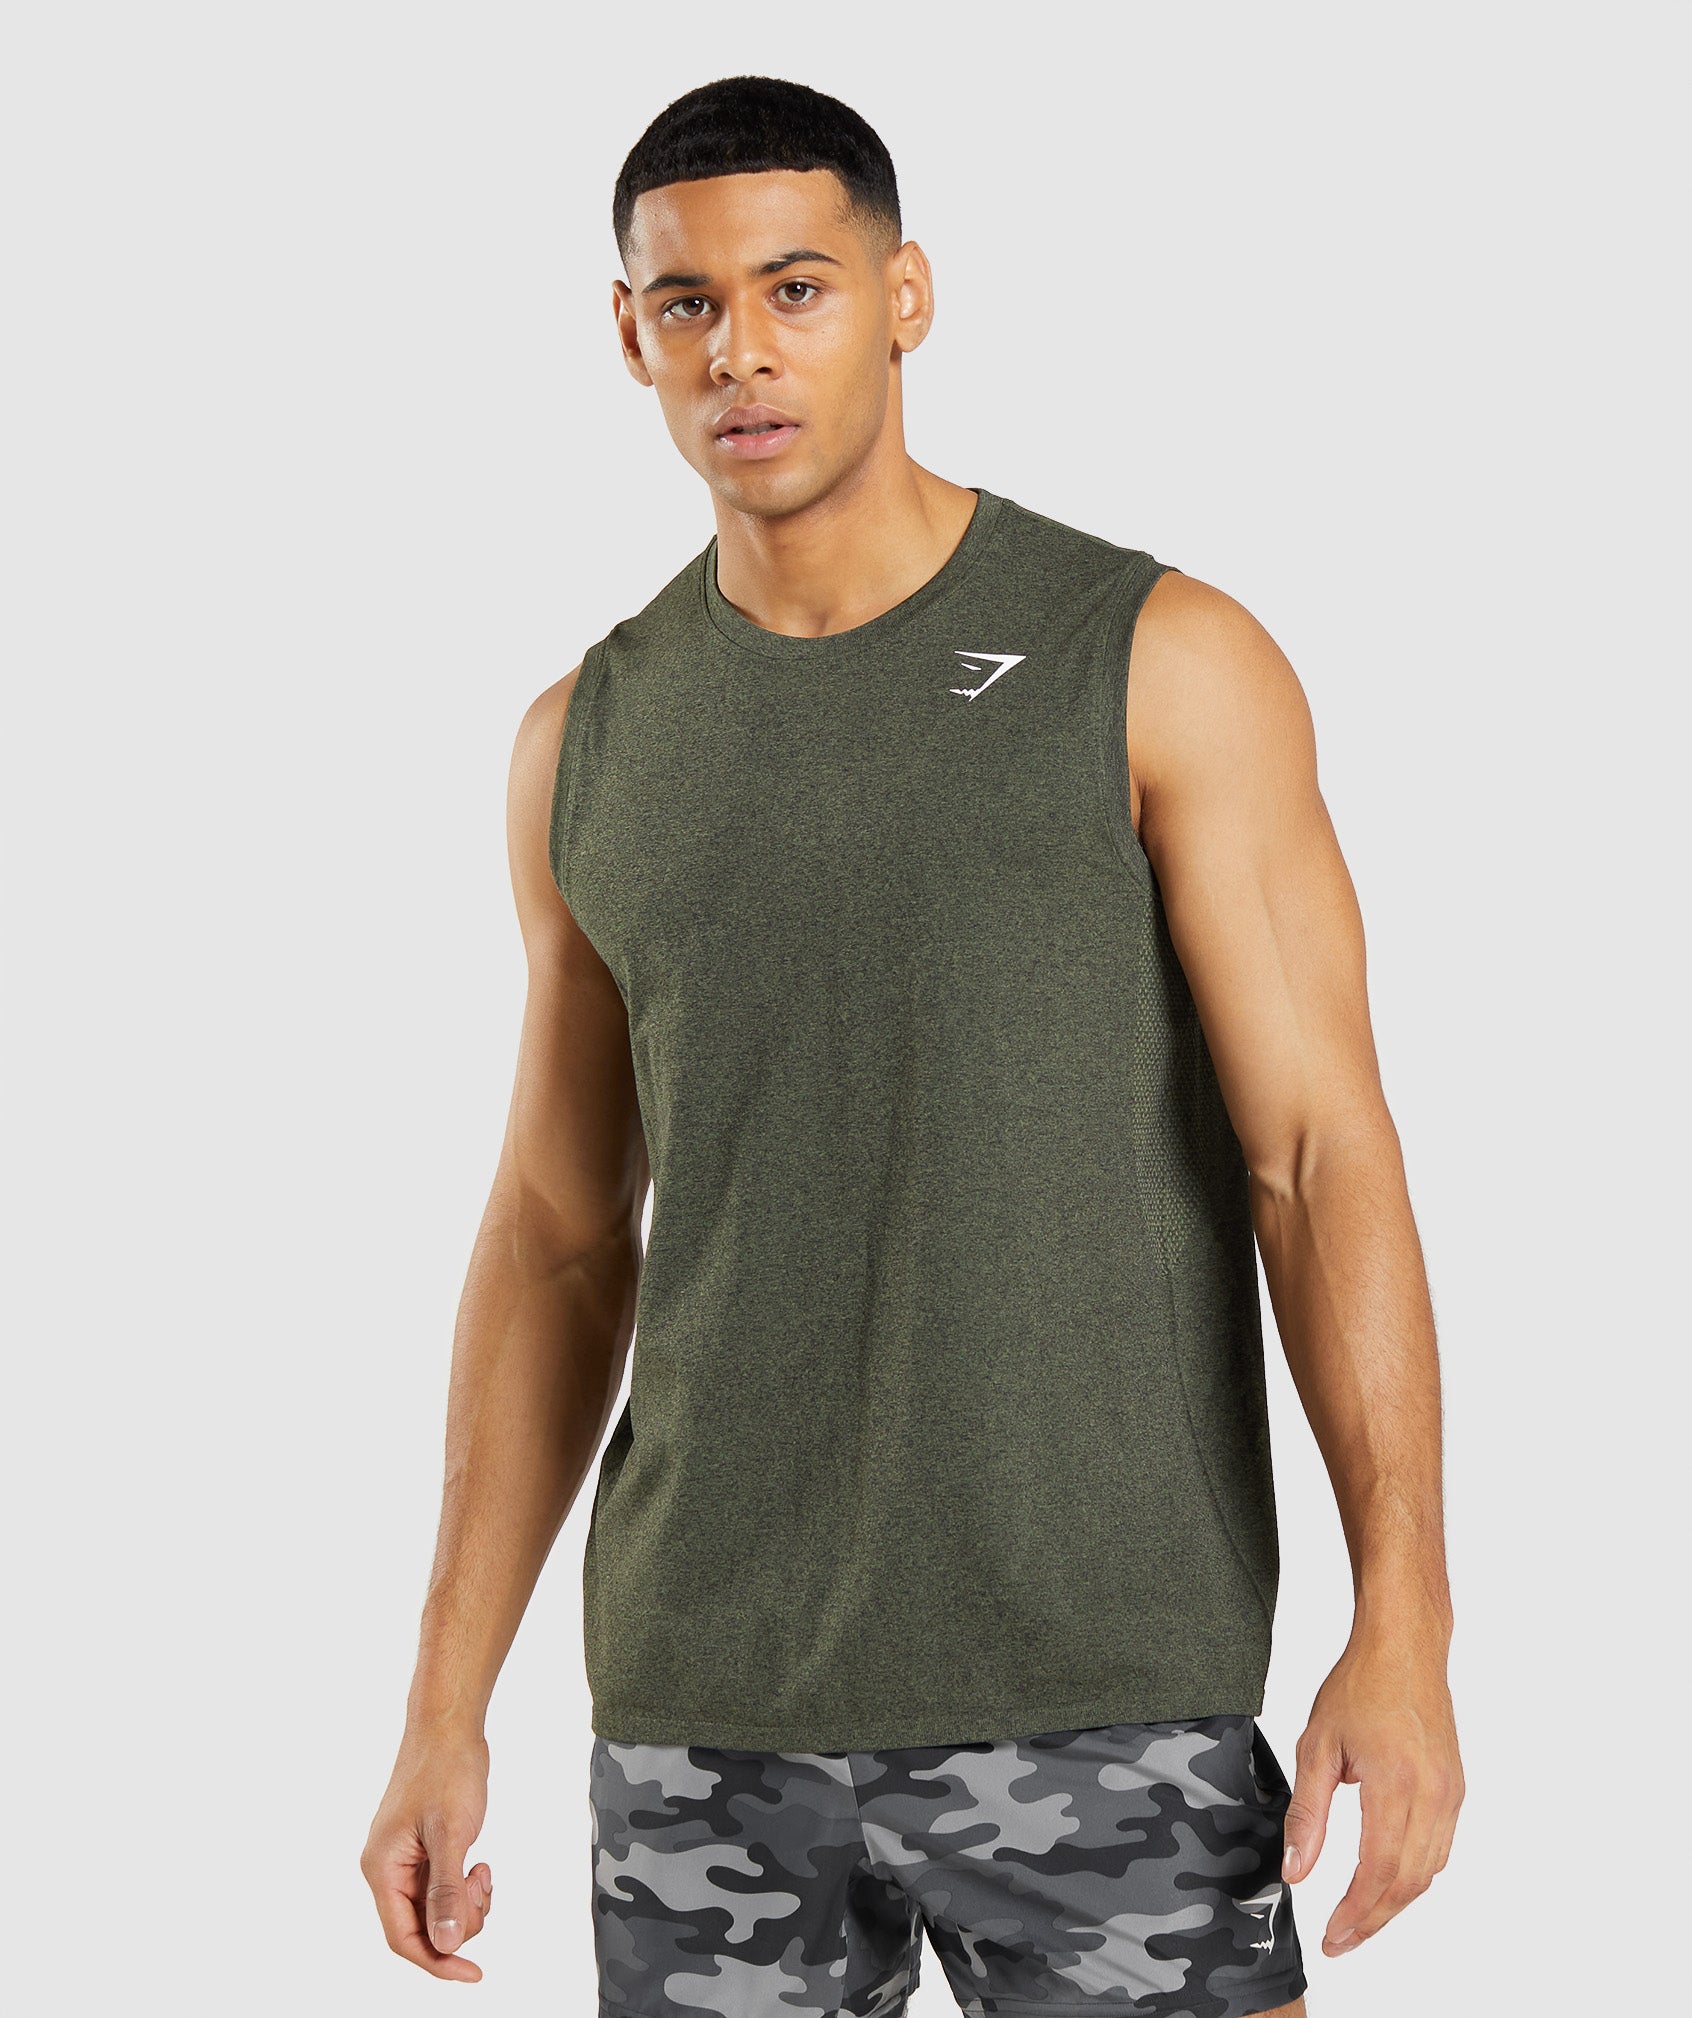 Arrival Seamless Tank in Core Olive Marl - view 1